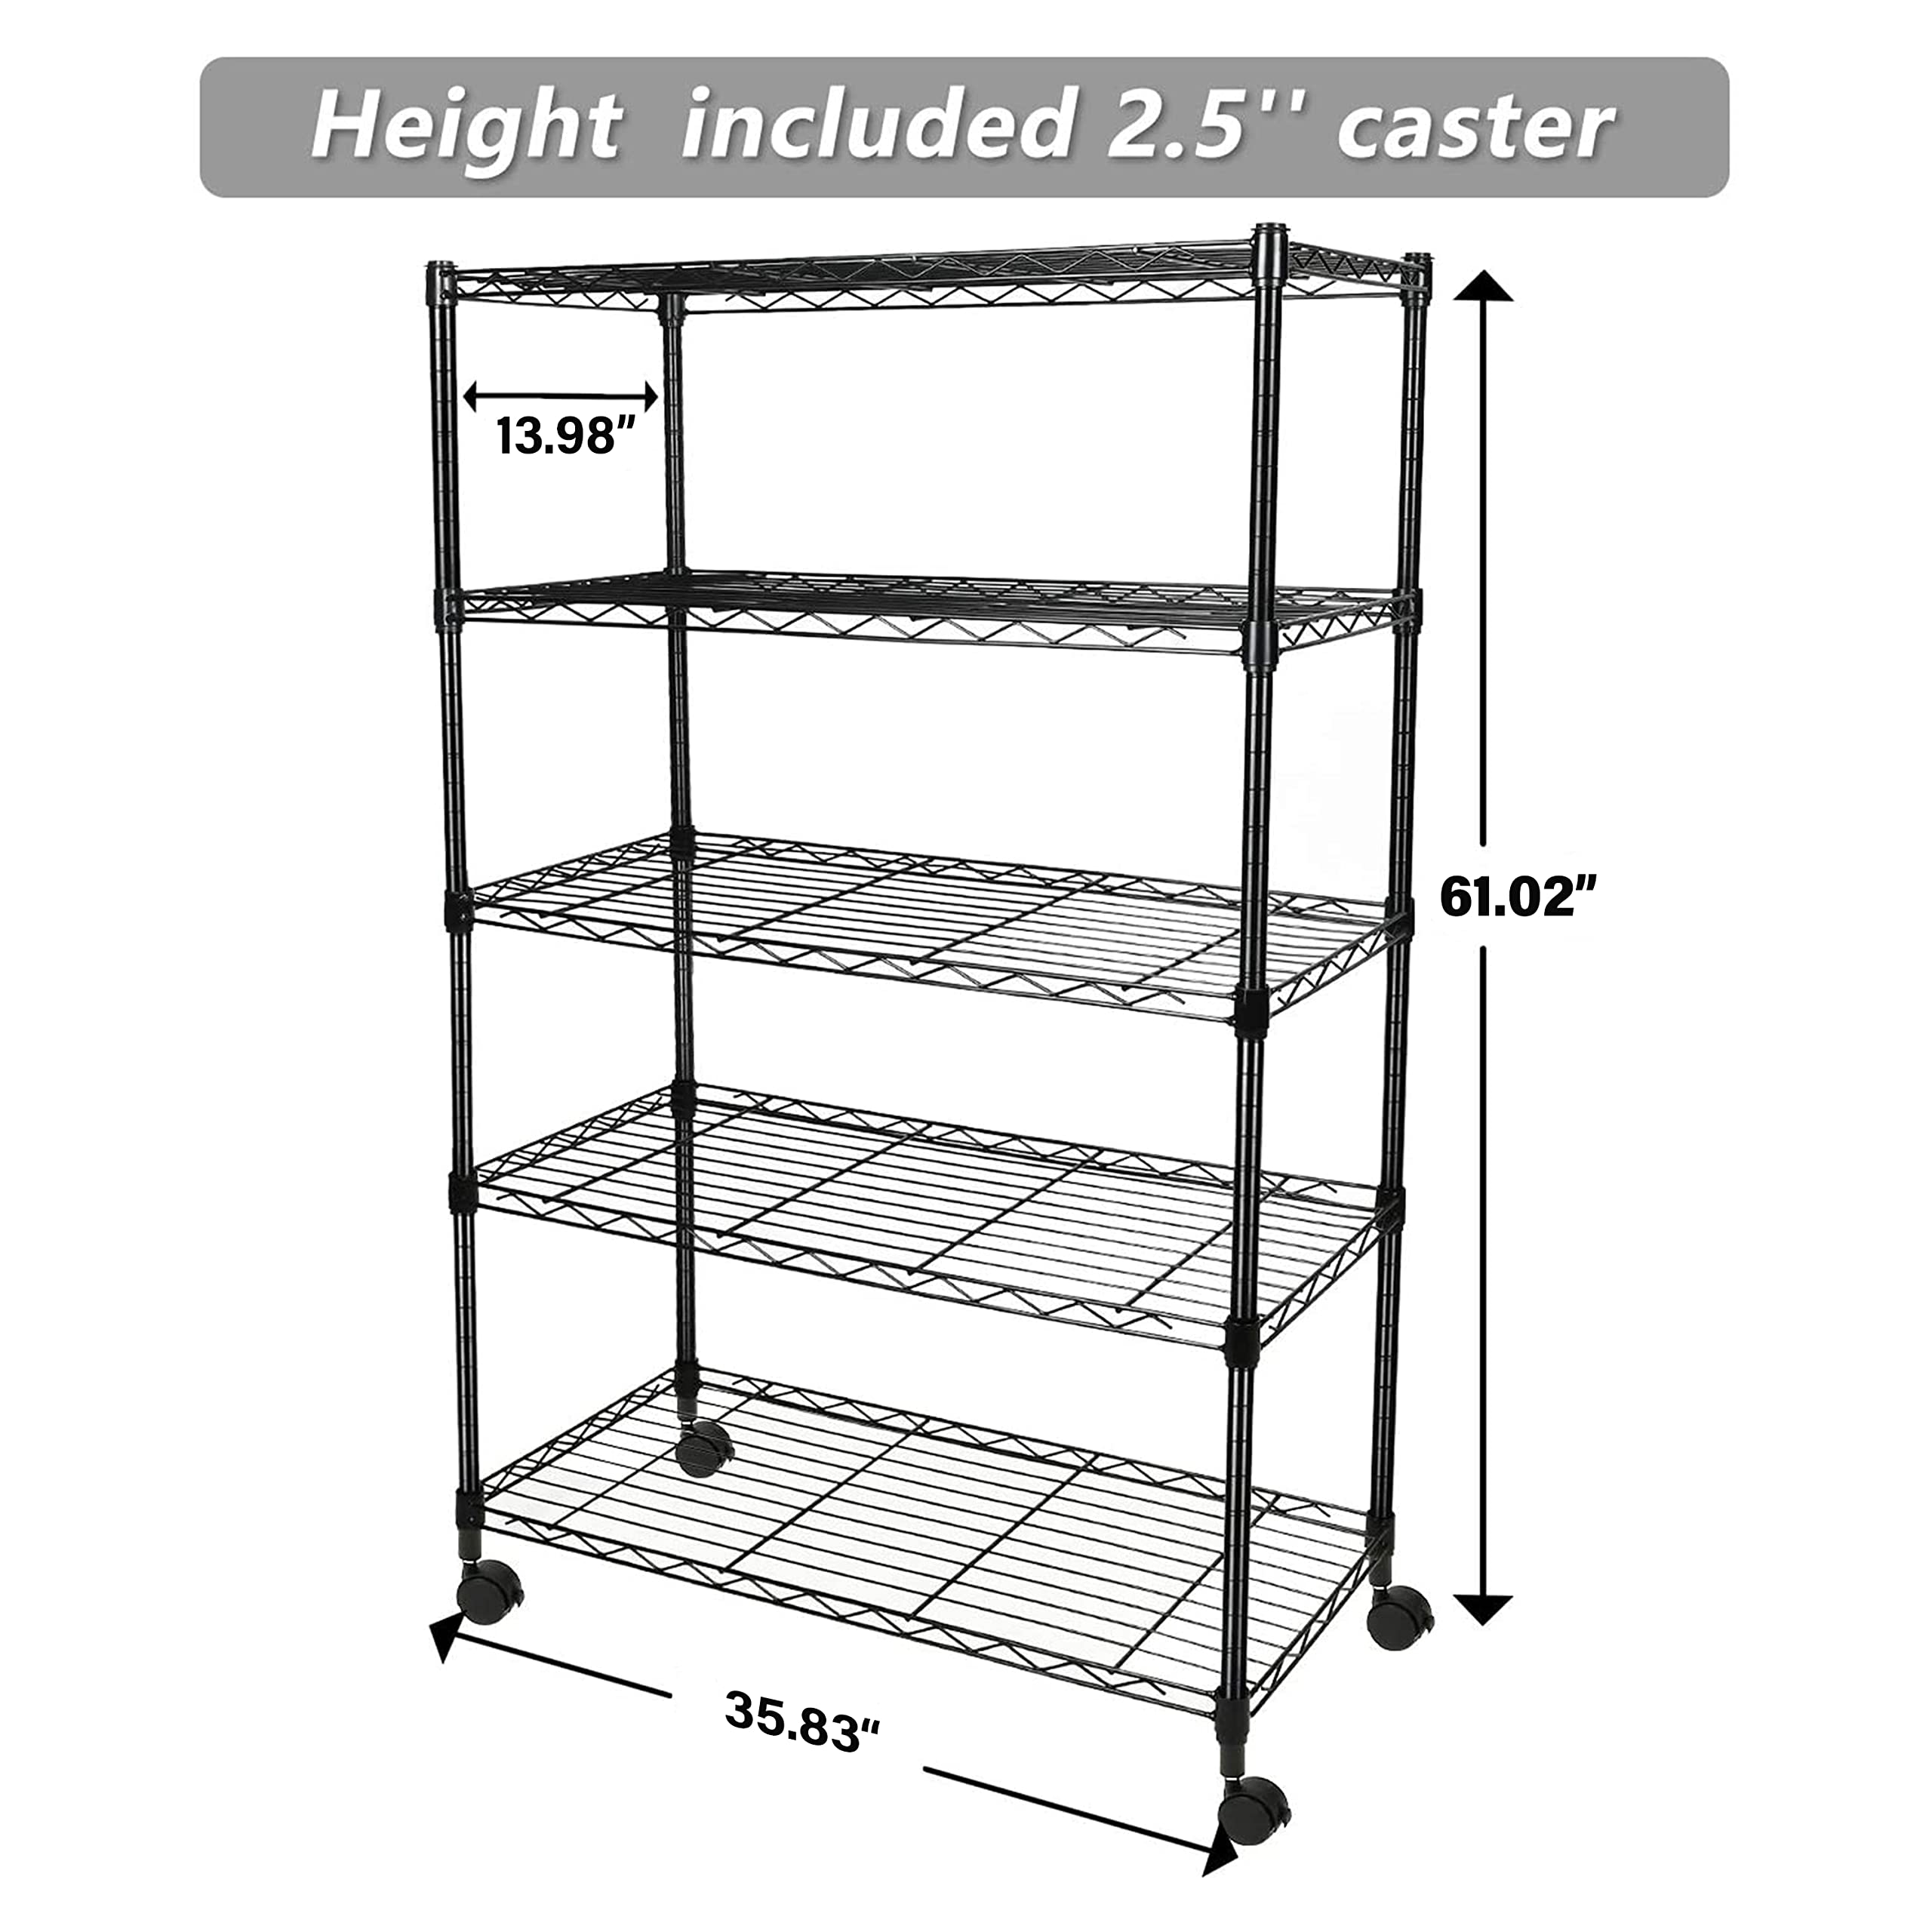 Simple Deluxe 5-Tier Heavy Duty Storage Shelving Unit,Black,36Lx14Wx60H inch, 1 Pack